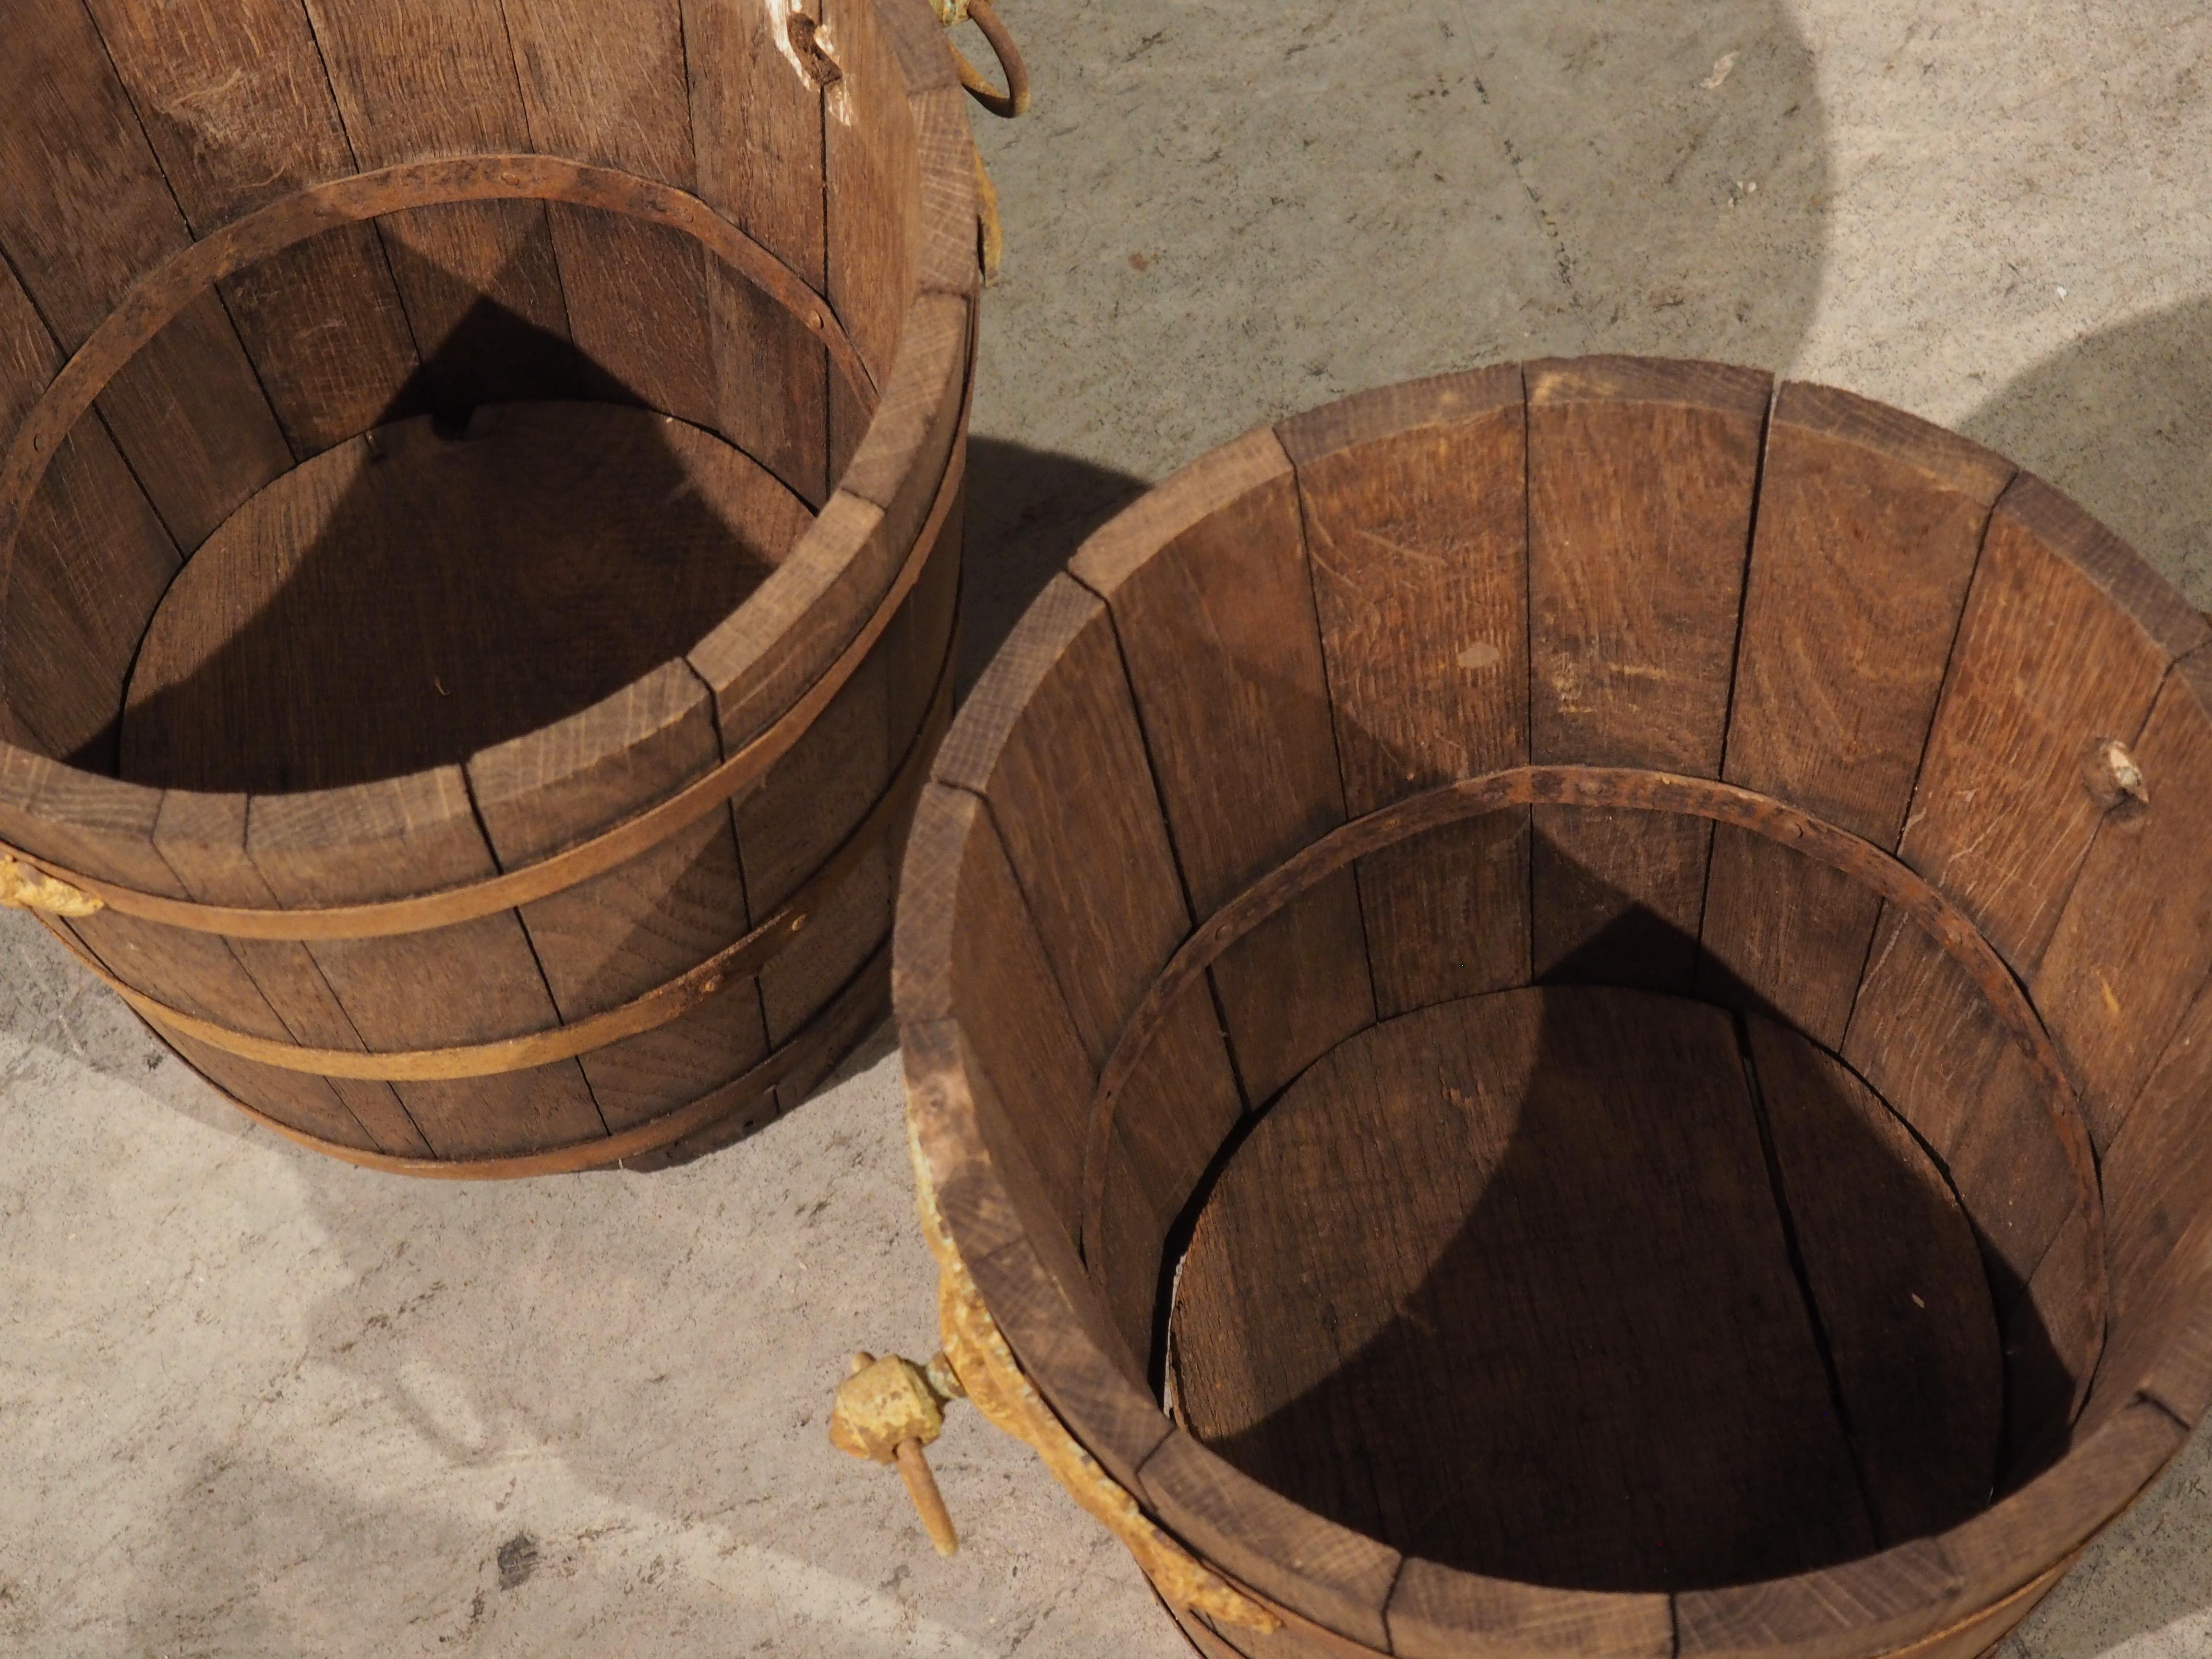 Enveloped with three circumferential bindings, this pair of French oak and iron buckets have held their form very well. hand carved from oak in the early 1900s, the wood has a deep brown color. Each bucket is also adorned by three straps, a pair of